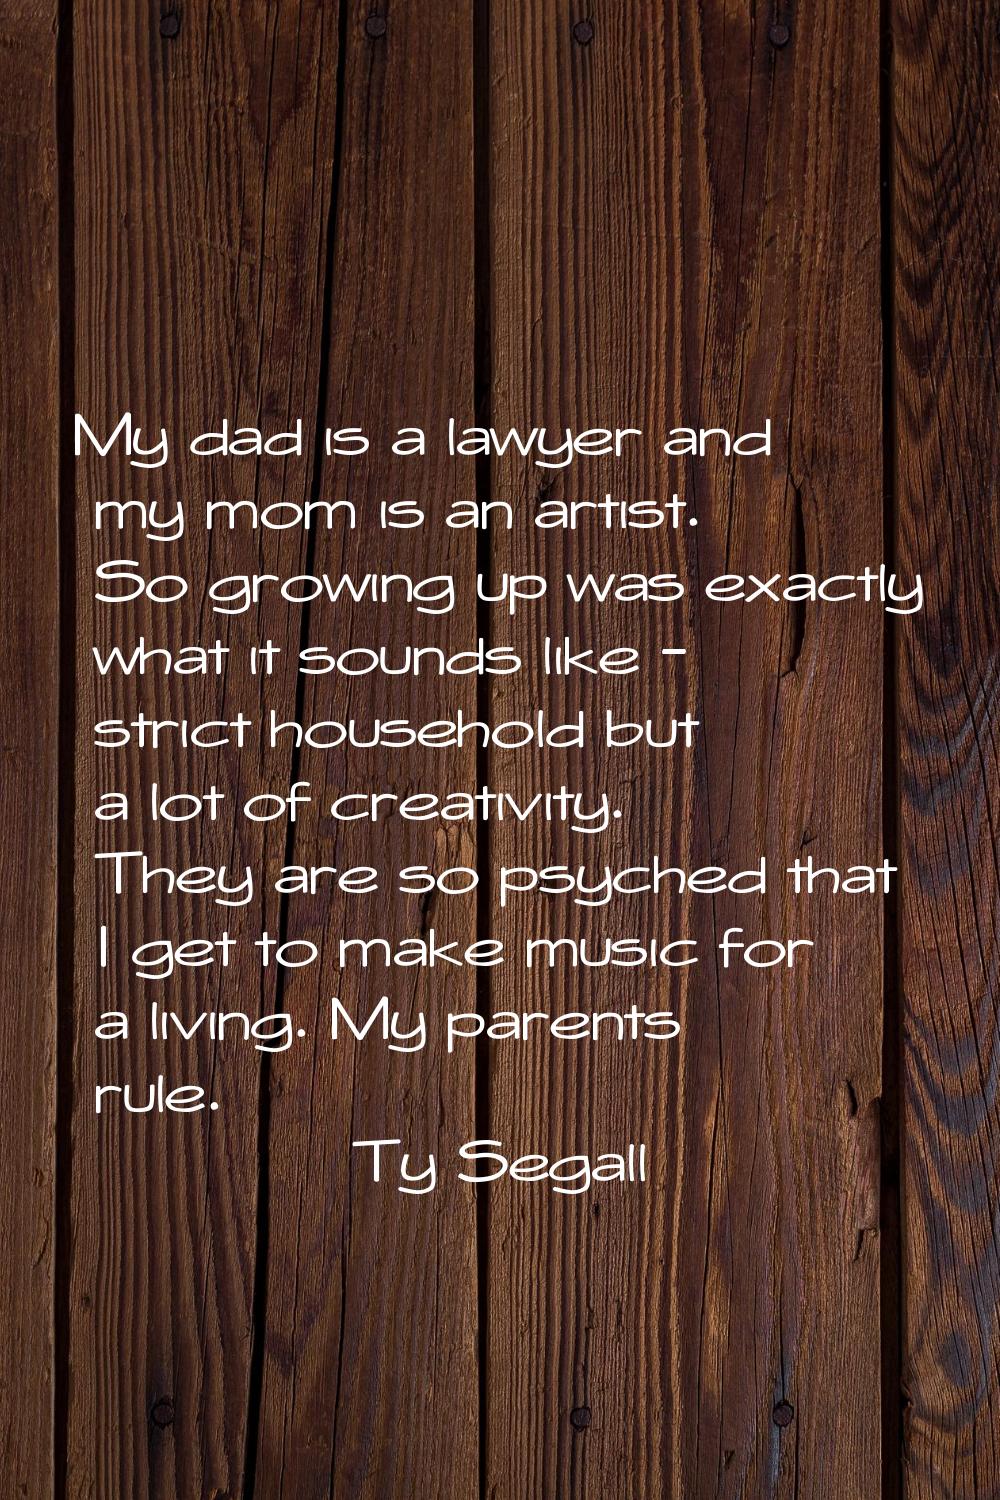 My dad is a lawyer and my mom is an artist. So growing up was exactly what it sounds like - strict 